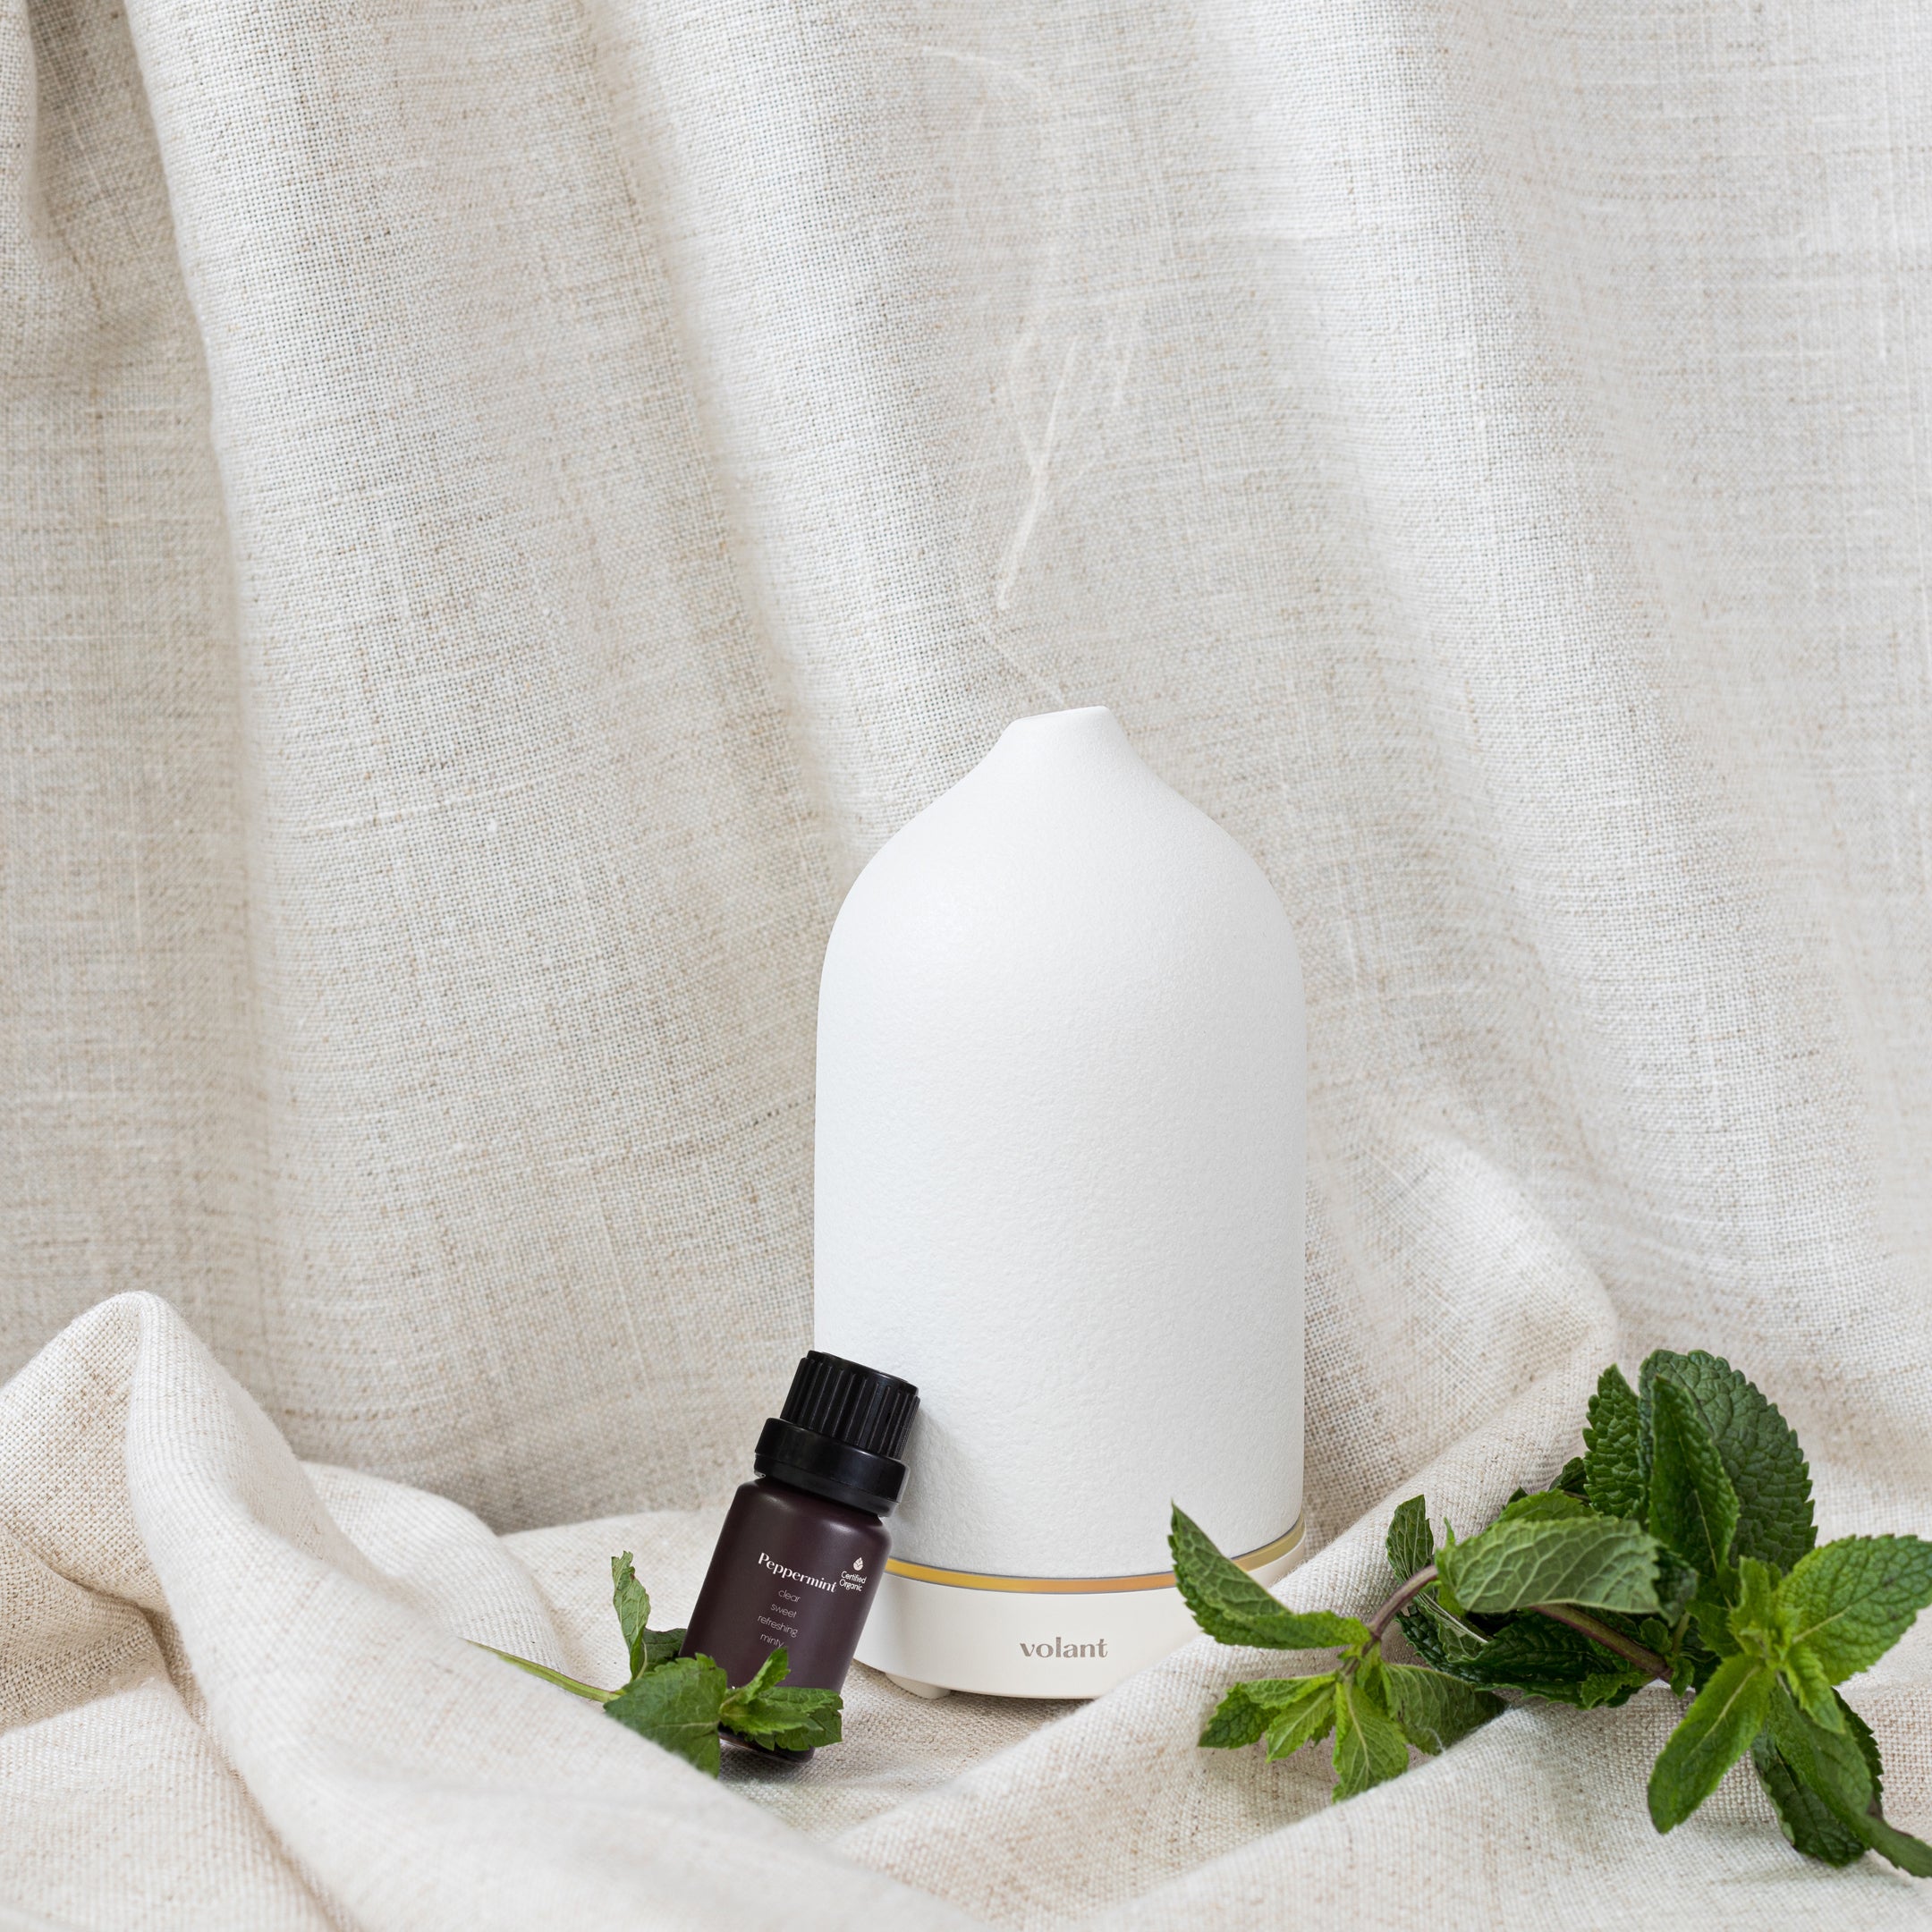 volant white diffuser using organic peppermint essential oil to keep mosquitoes away